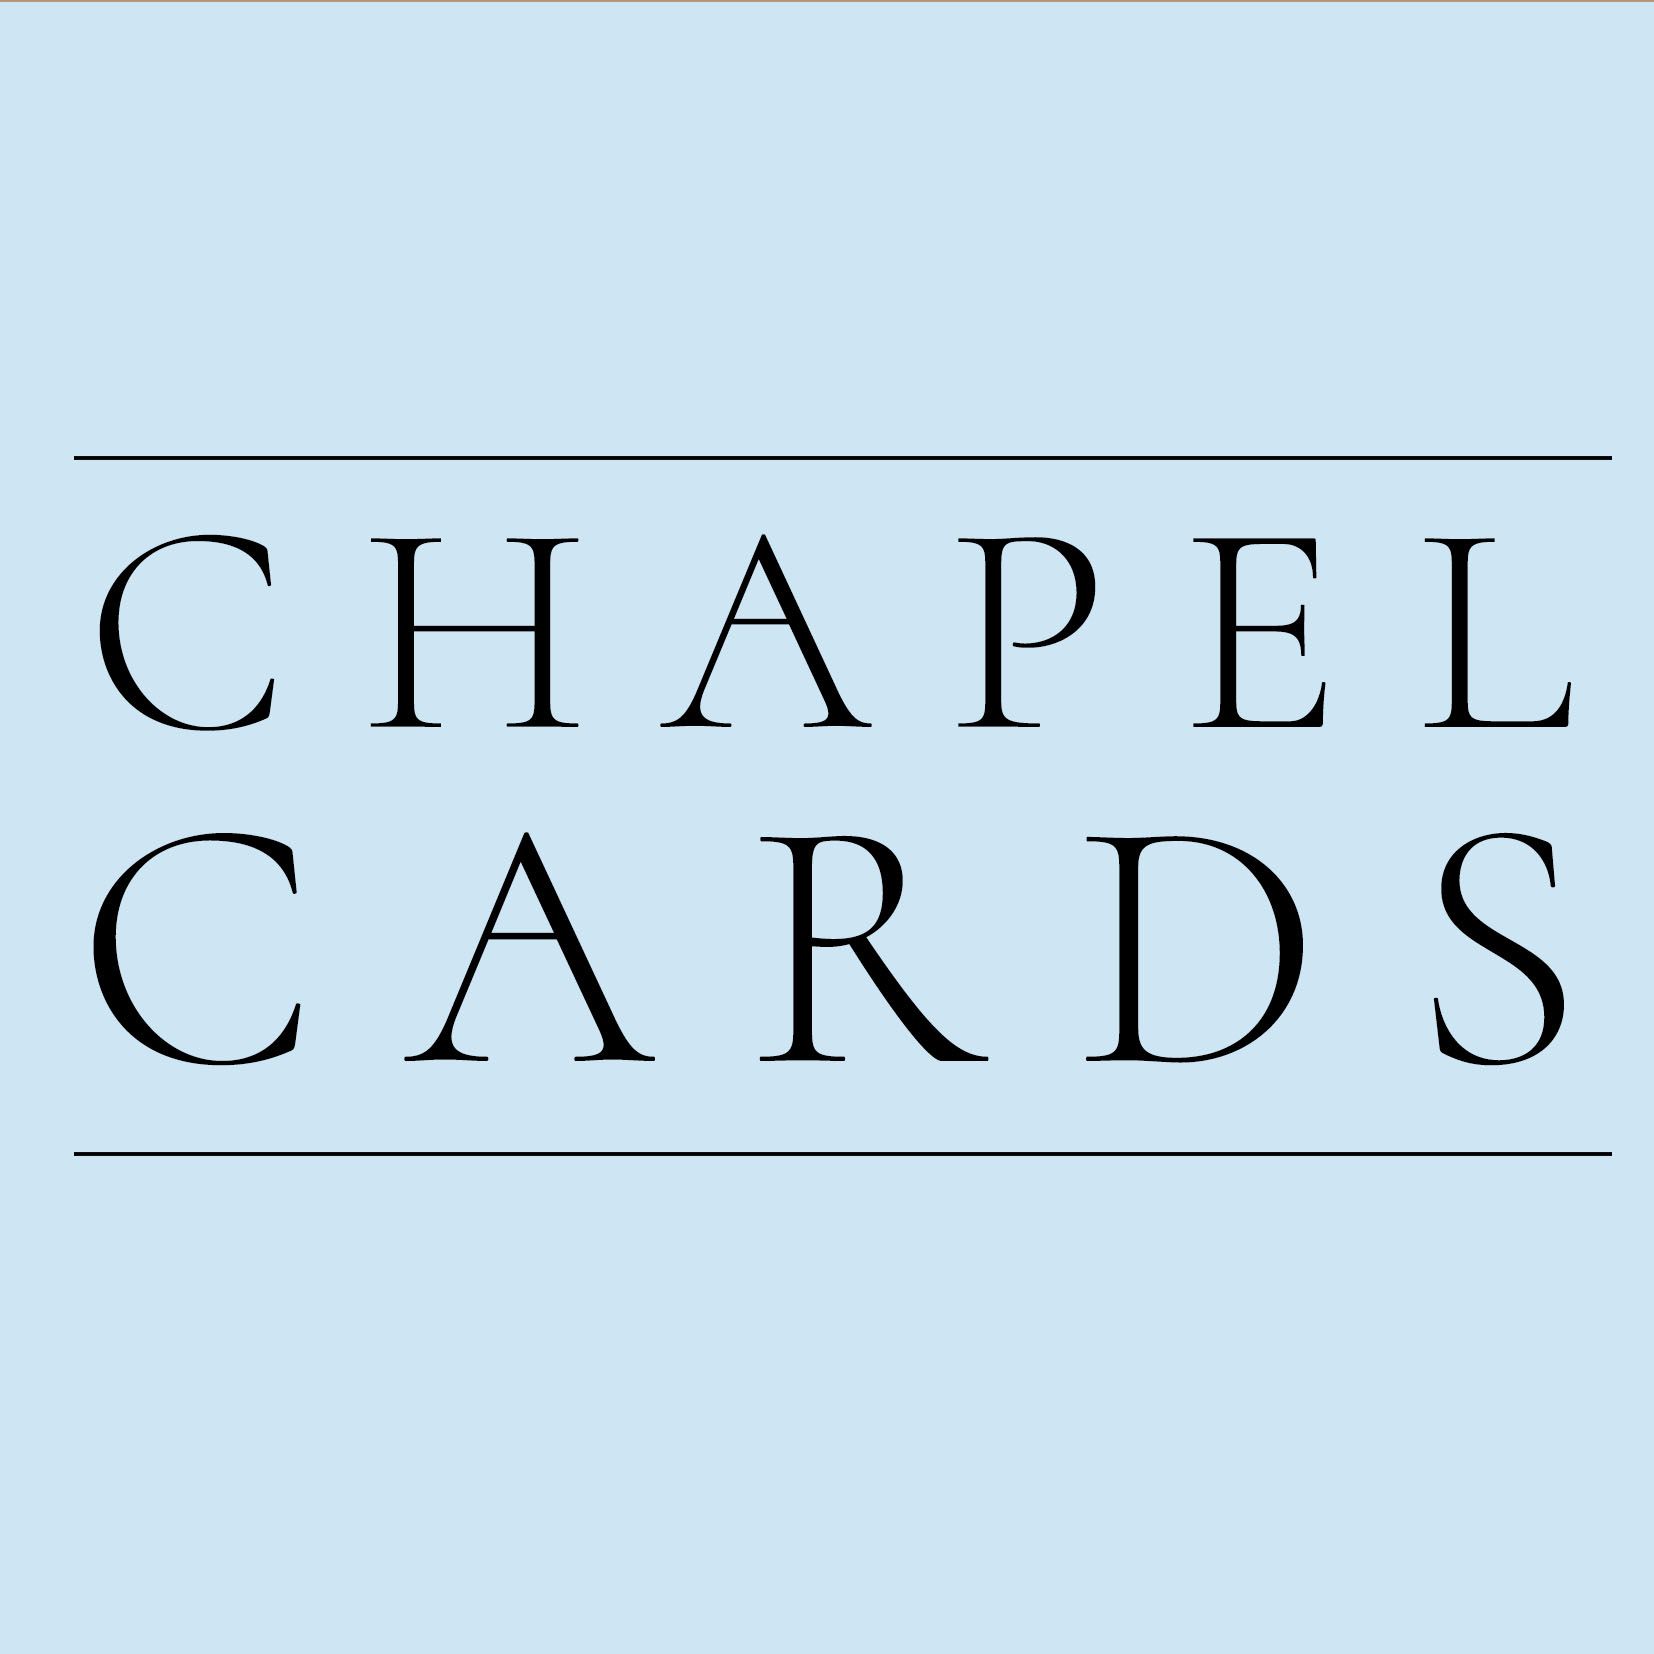 This shop is called ChapelCards 